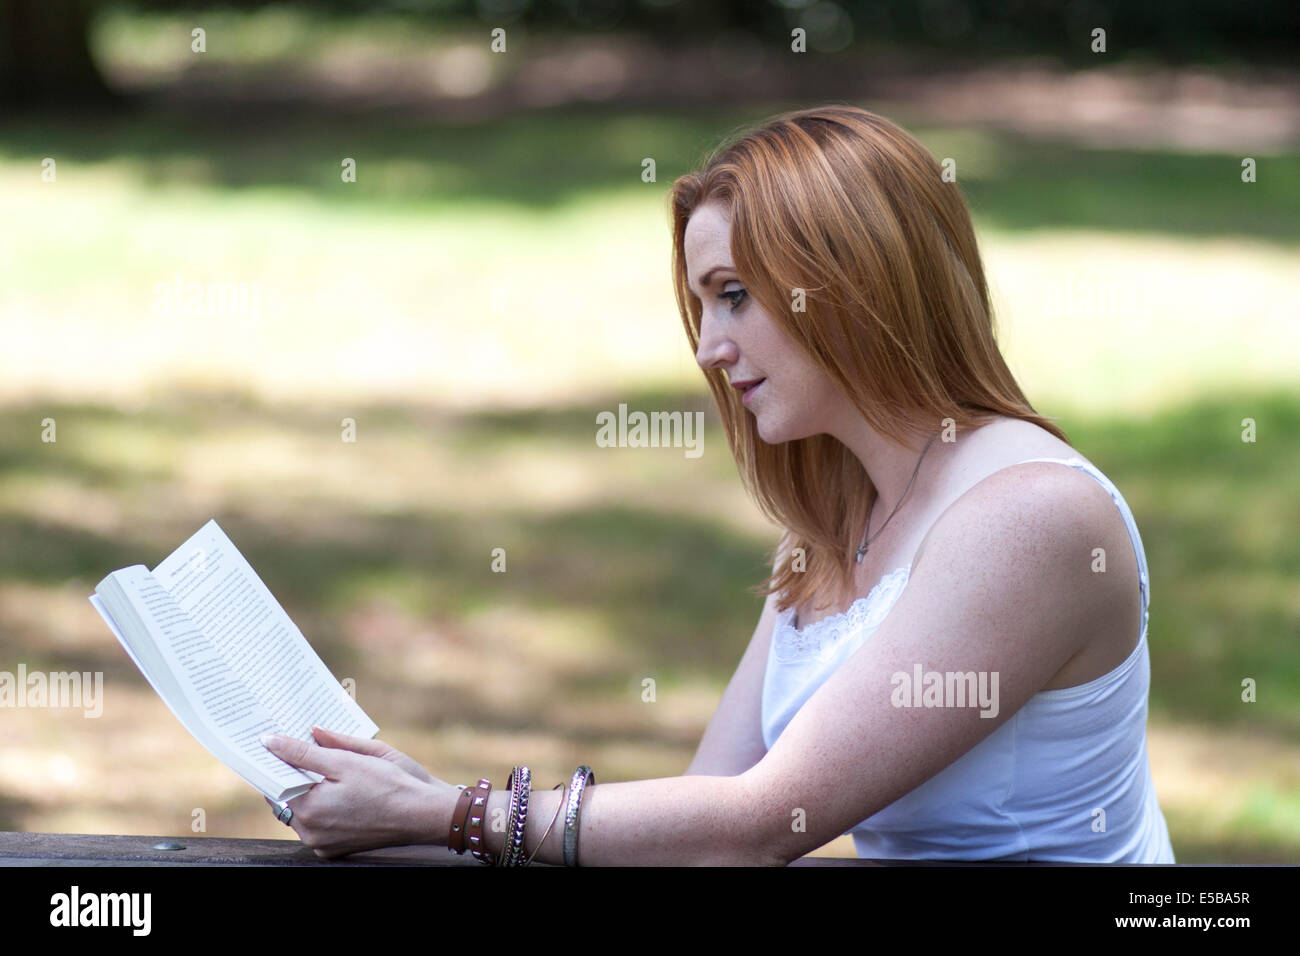 A pretty red haired young girl enjoying a book in the park Stock Photo